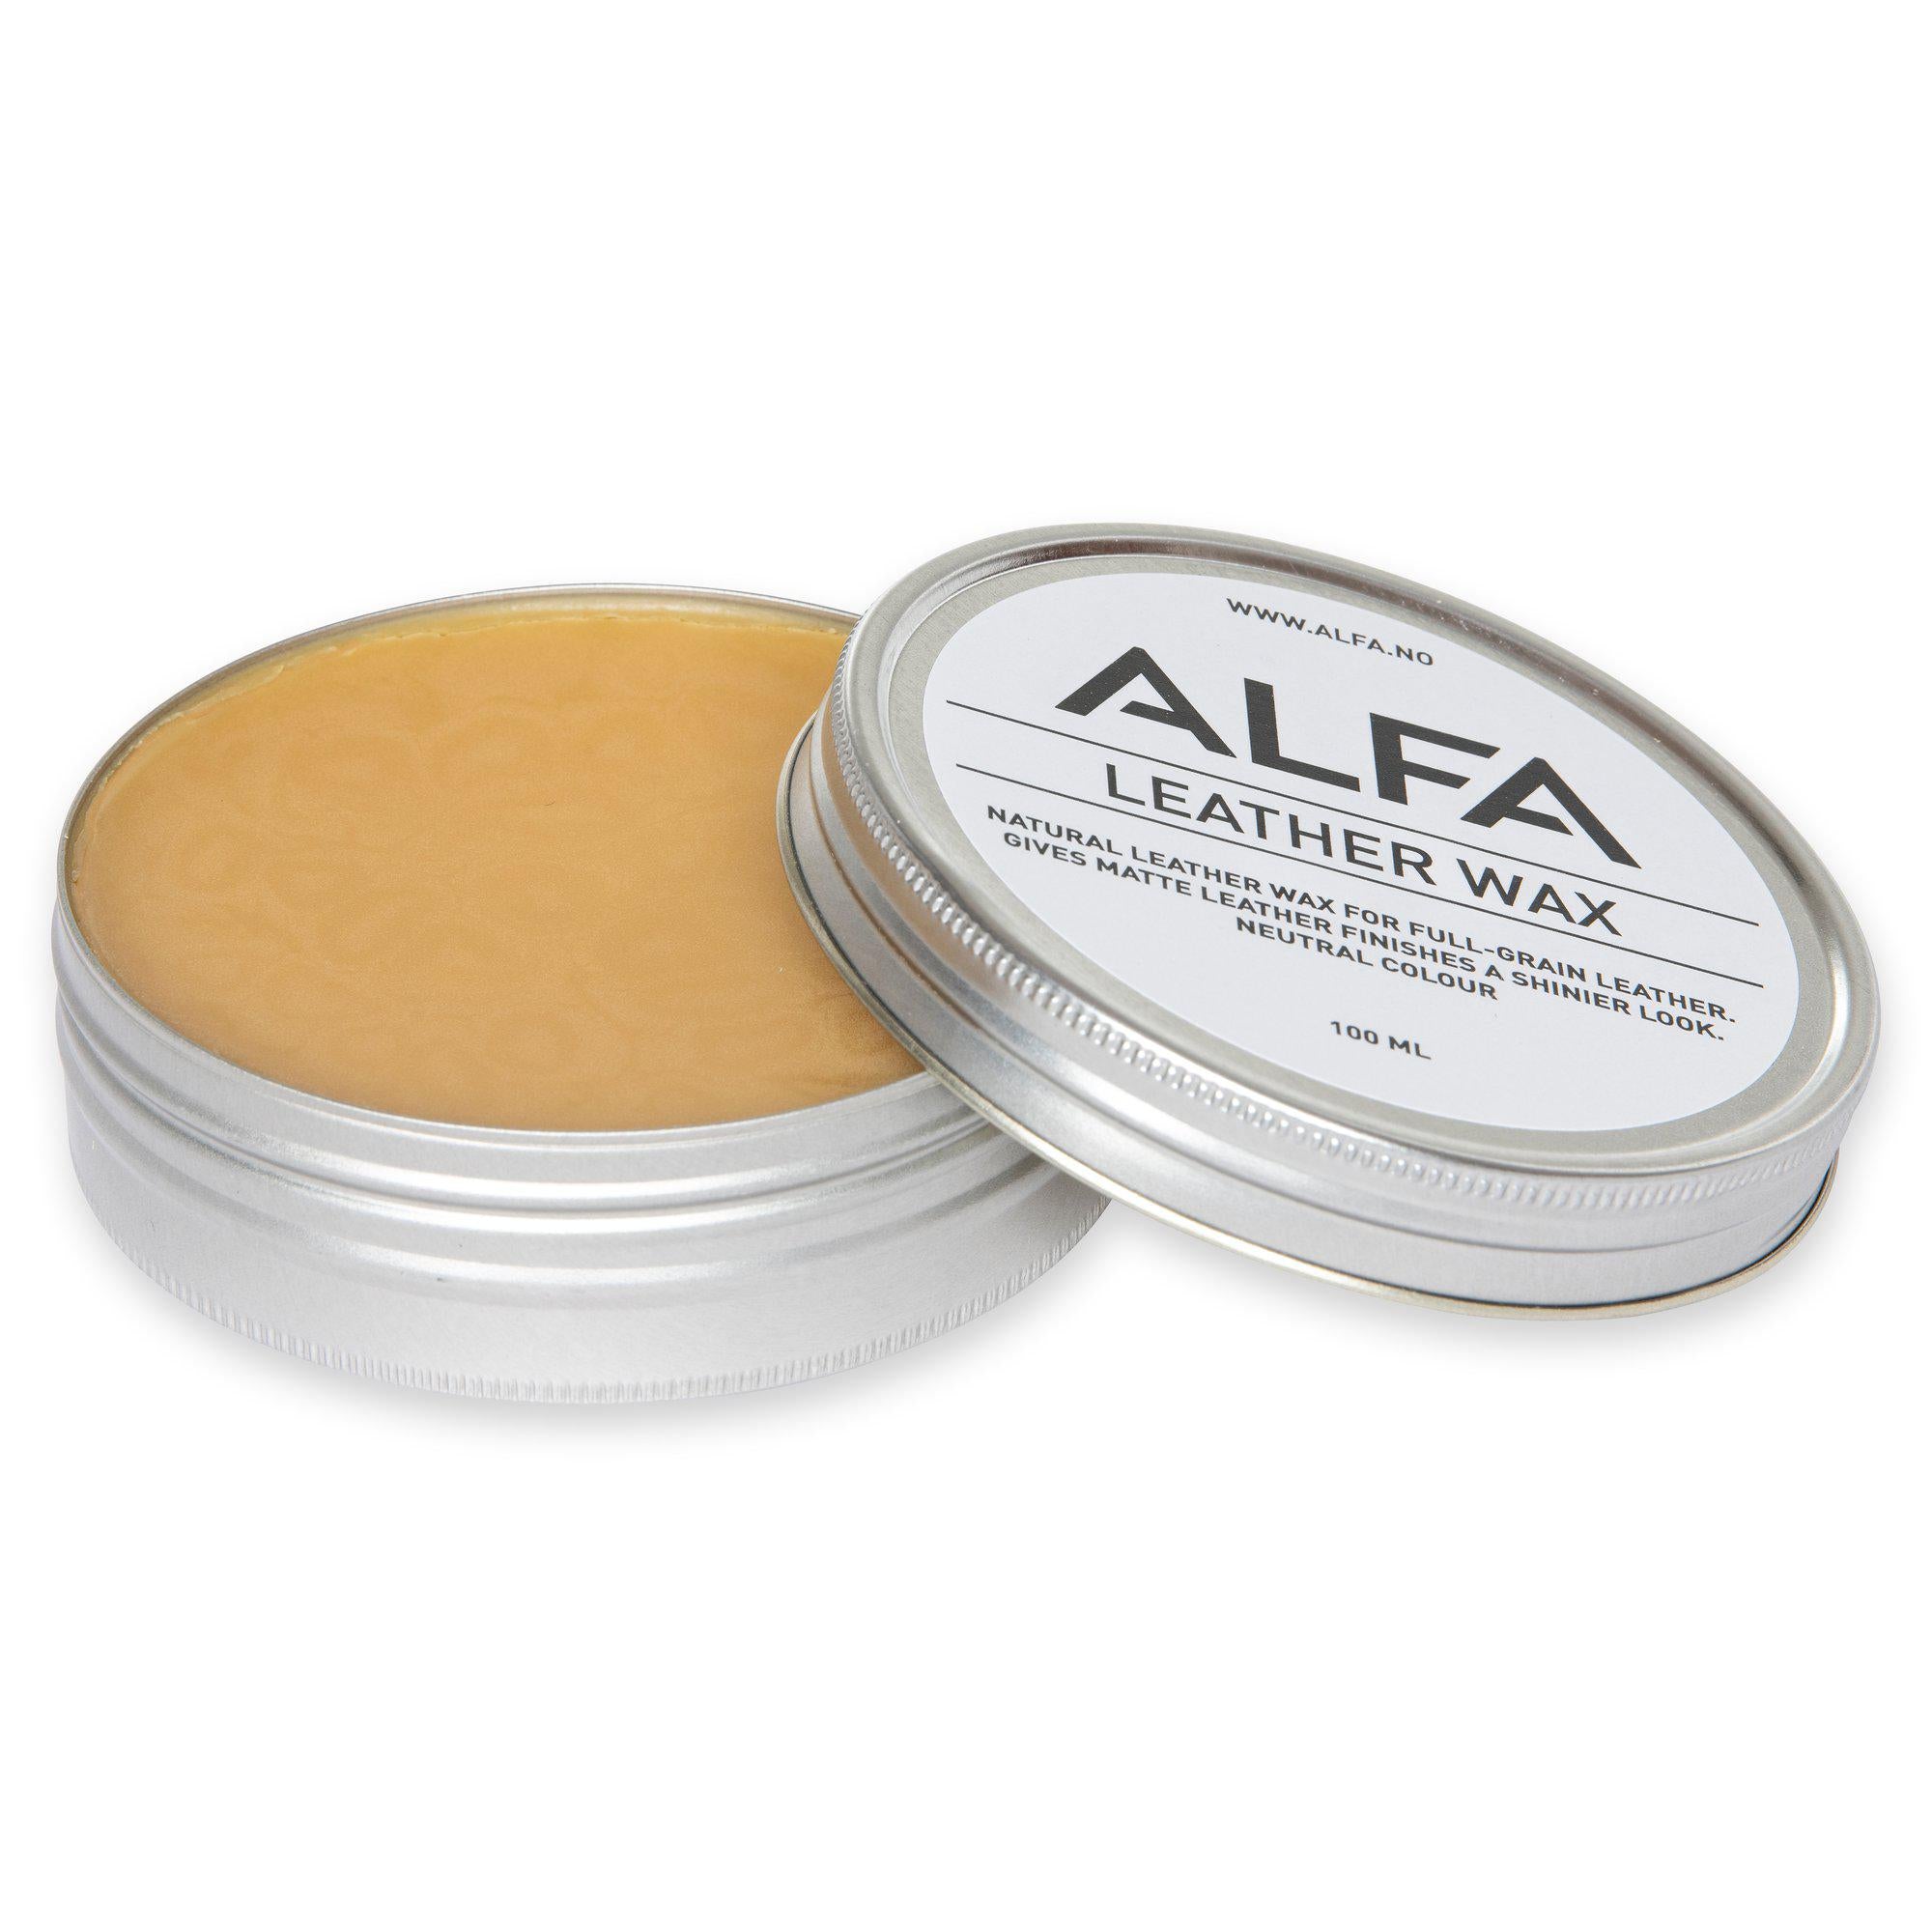 Leather wax to protect shoes and boots